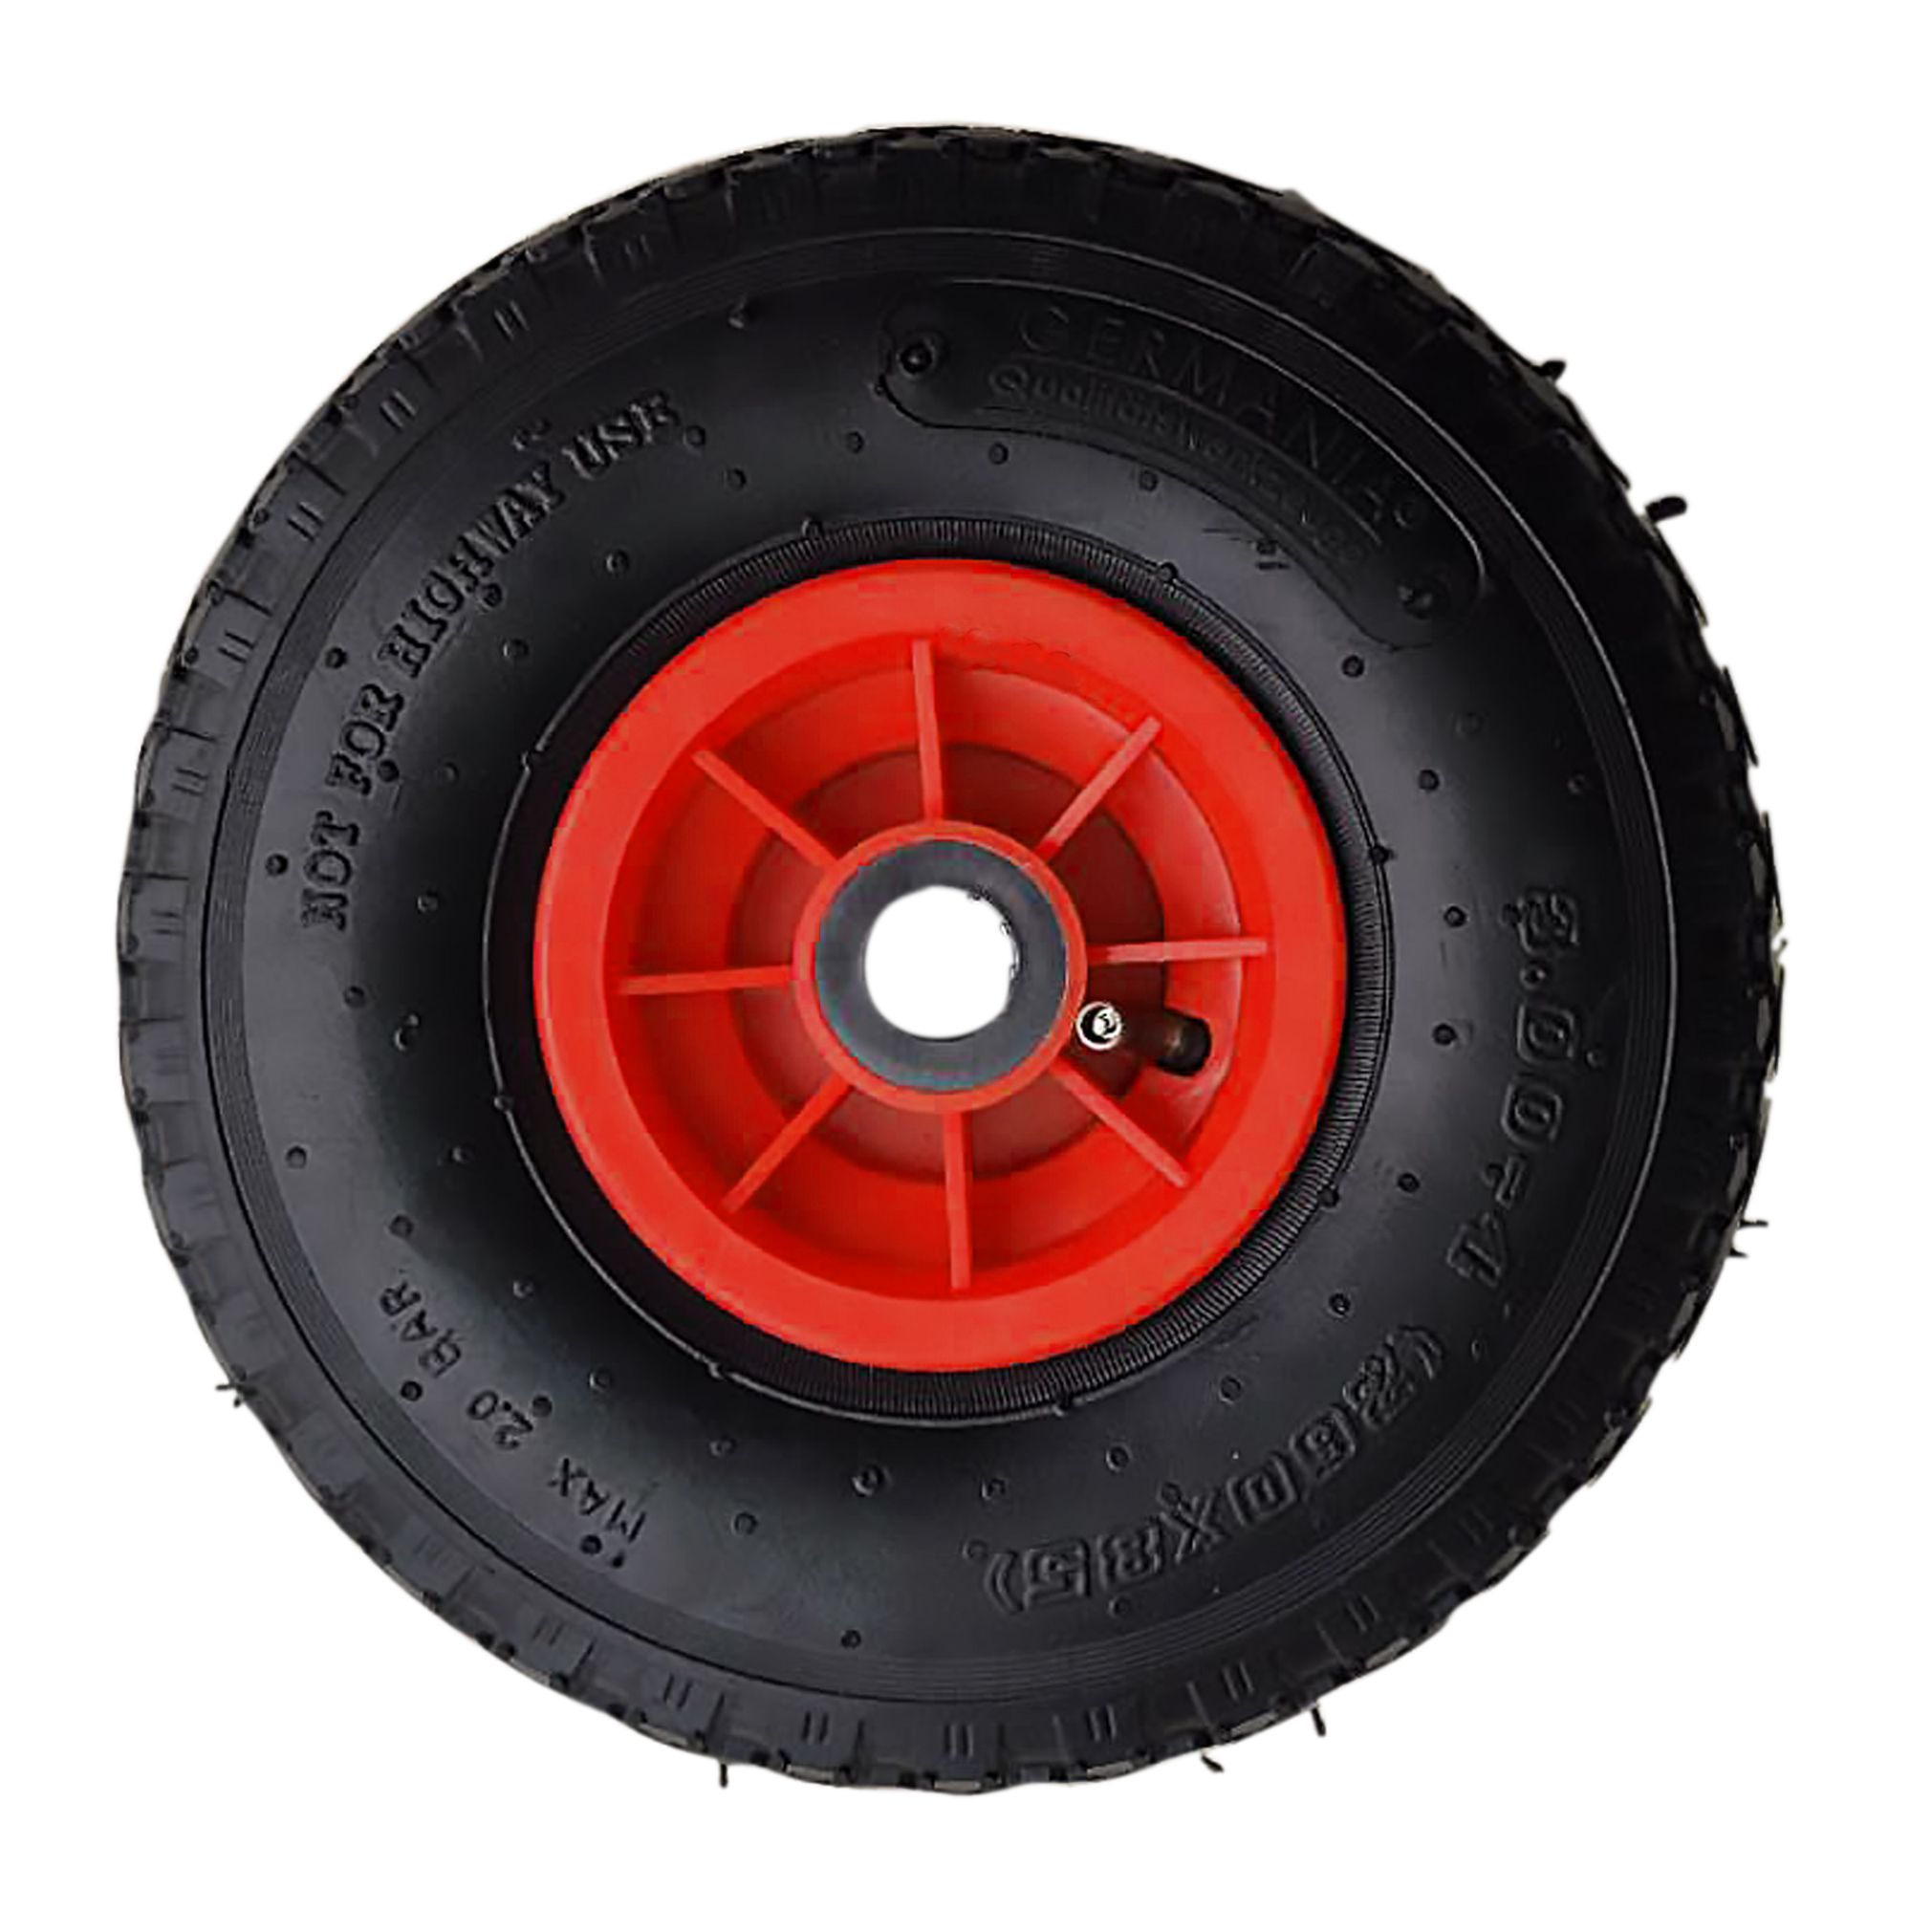 Trolley wheel with steel rim and pneumatic tyre - 3.00-4 - 20 mm